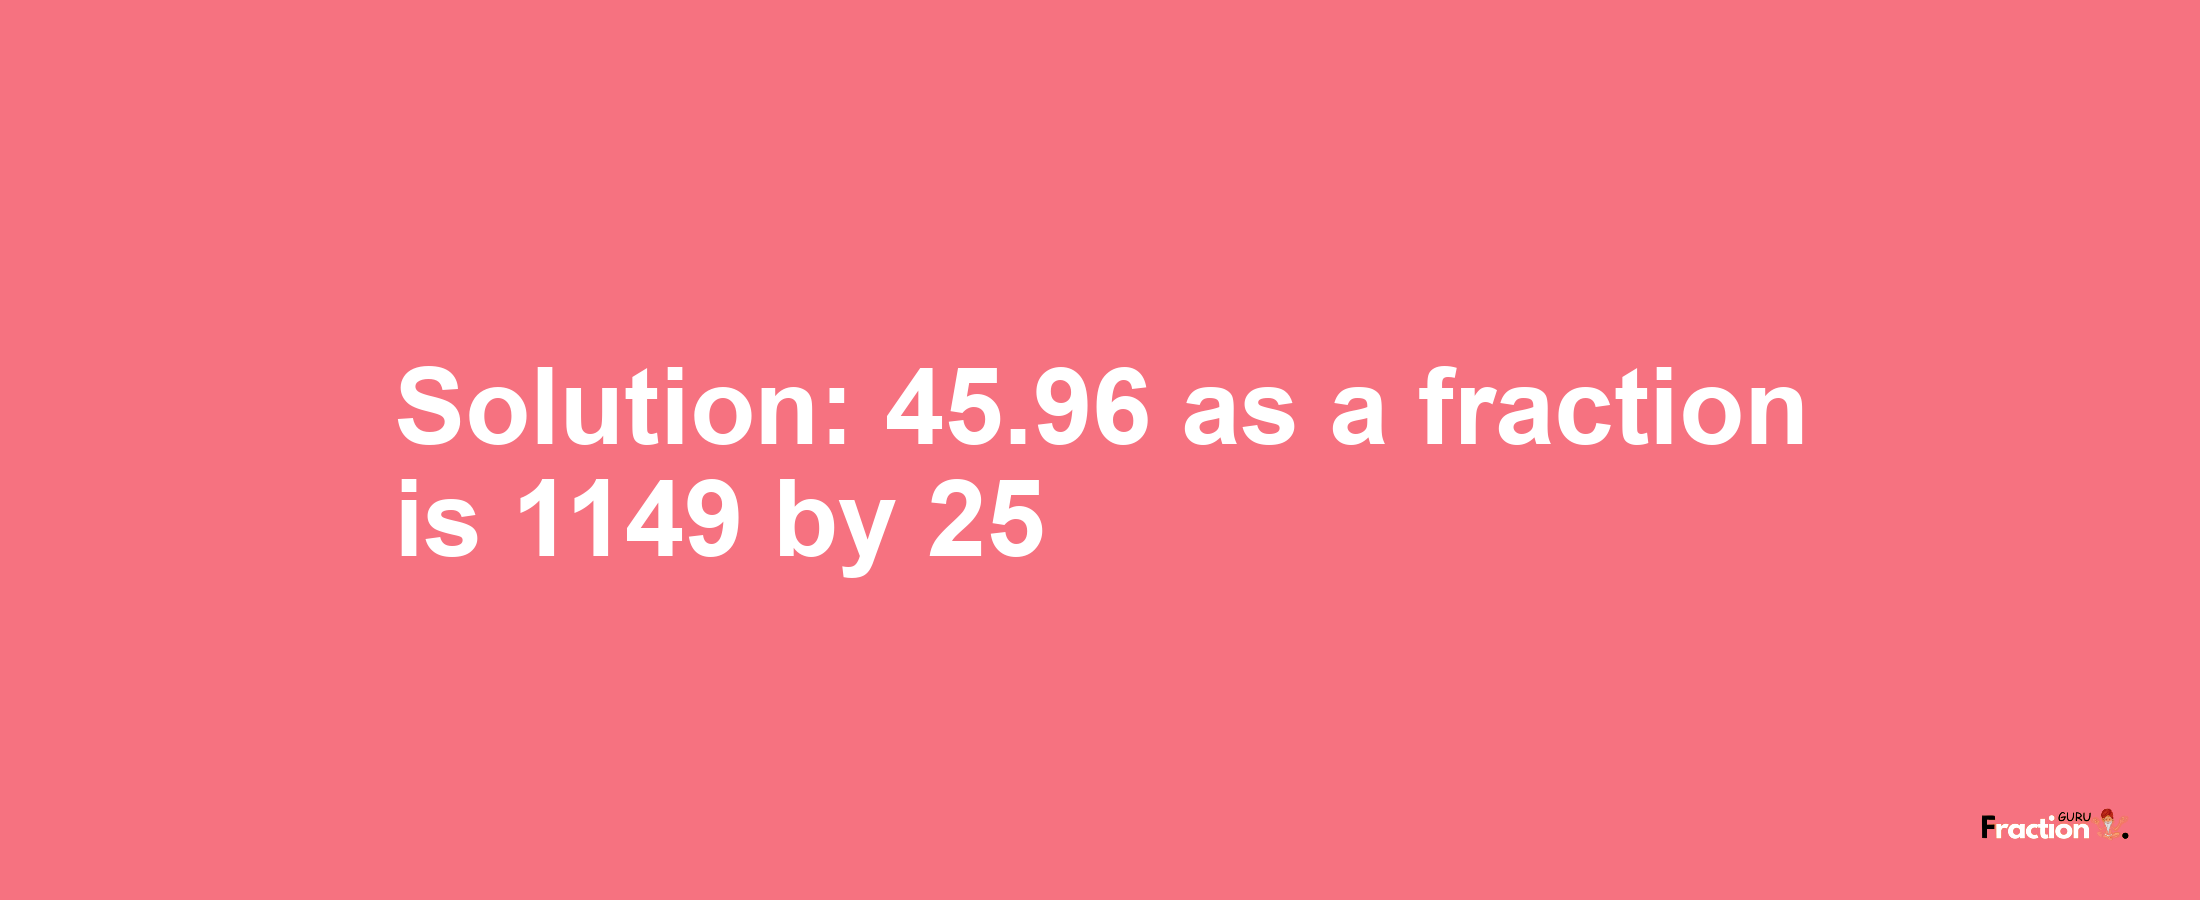 Solution:45.96 as a fraction is 1149/25